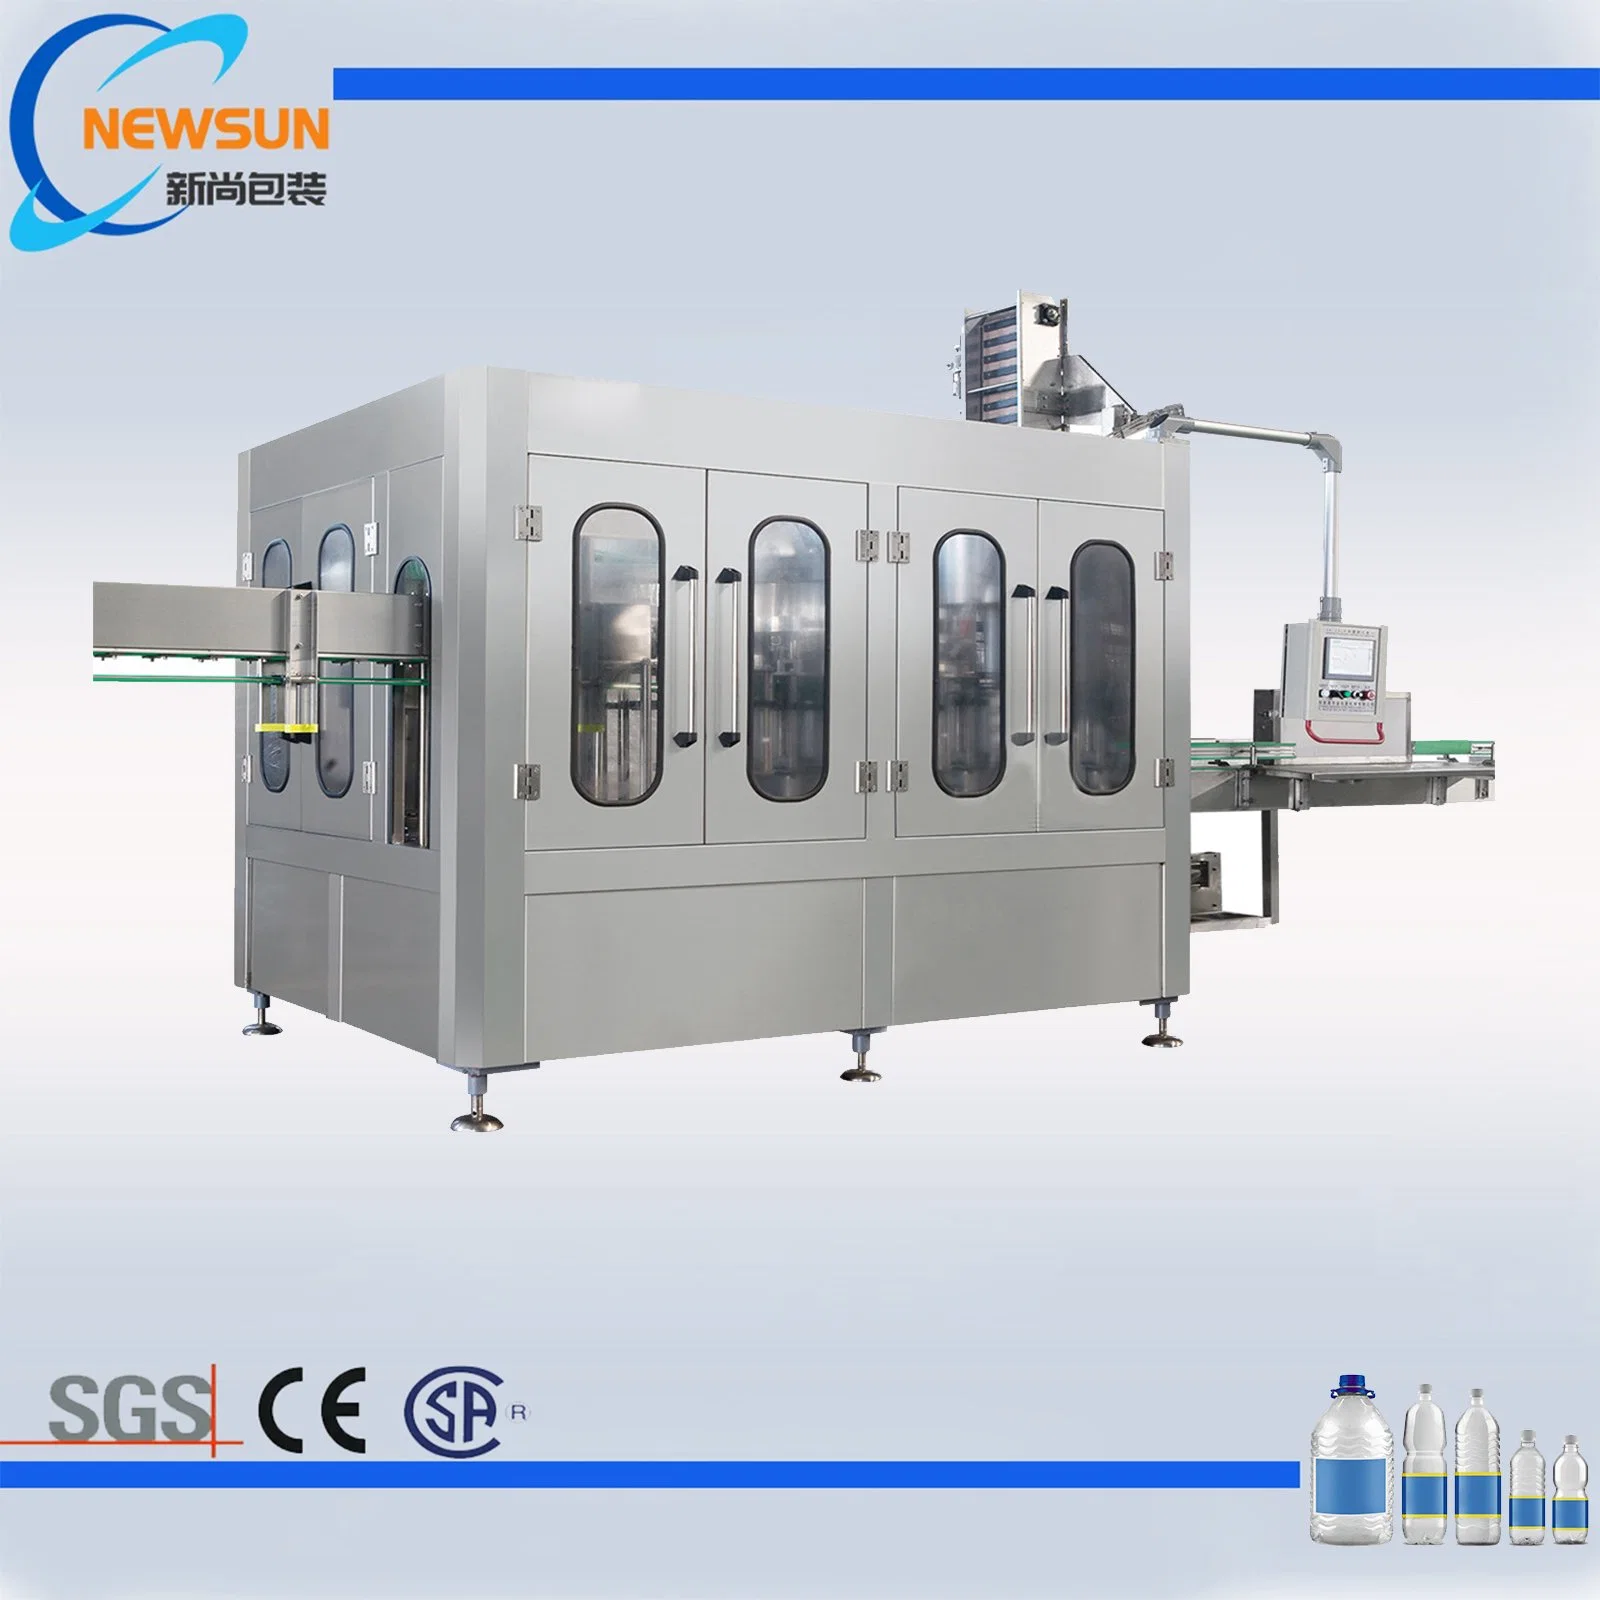 Turnkey Project Automatic 3 in 1 Rinser Filler Capper System Mineral Pure Water Liquid Drinking Plastic Water Bottling Machine Plant Price